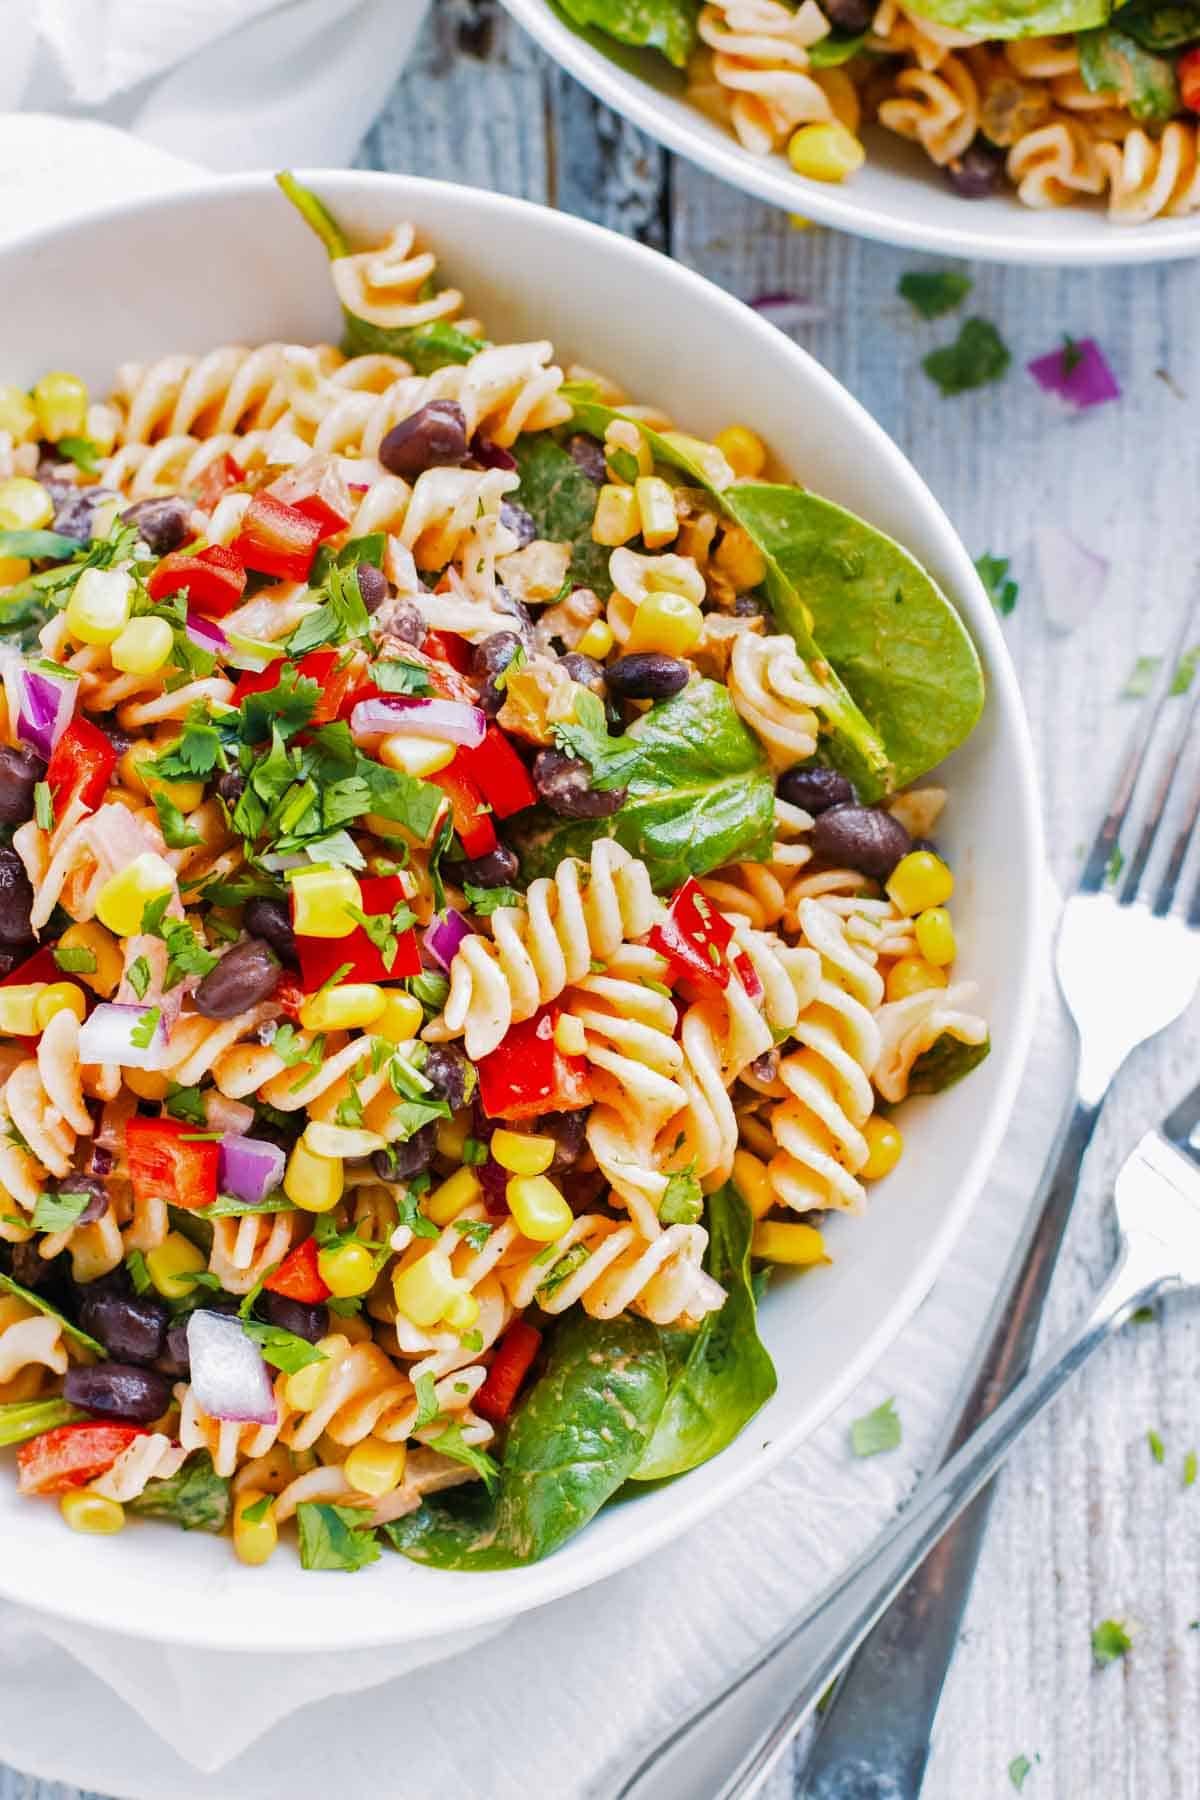 Healthy gluten-free pasta salad in a white bowl for lunch.